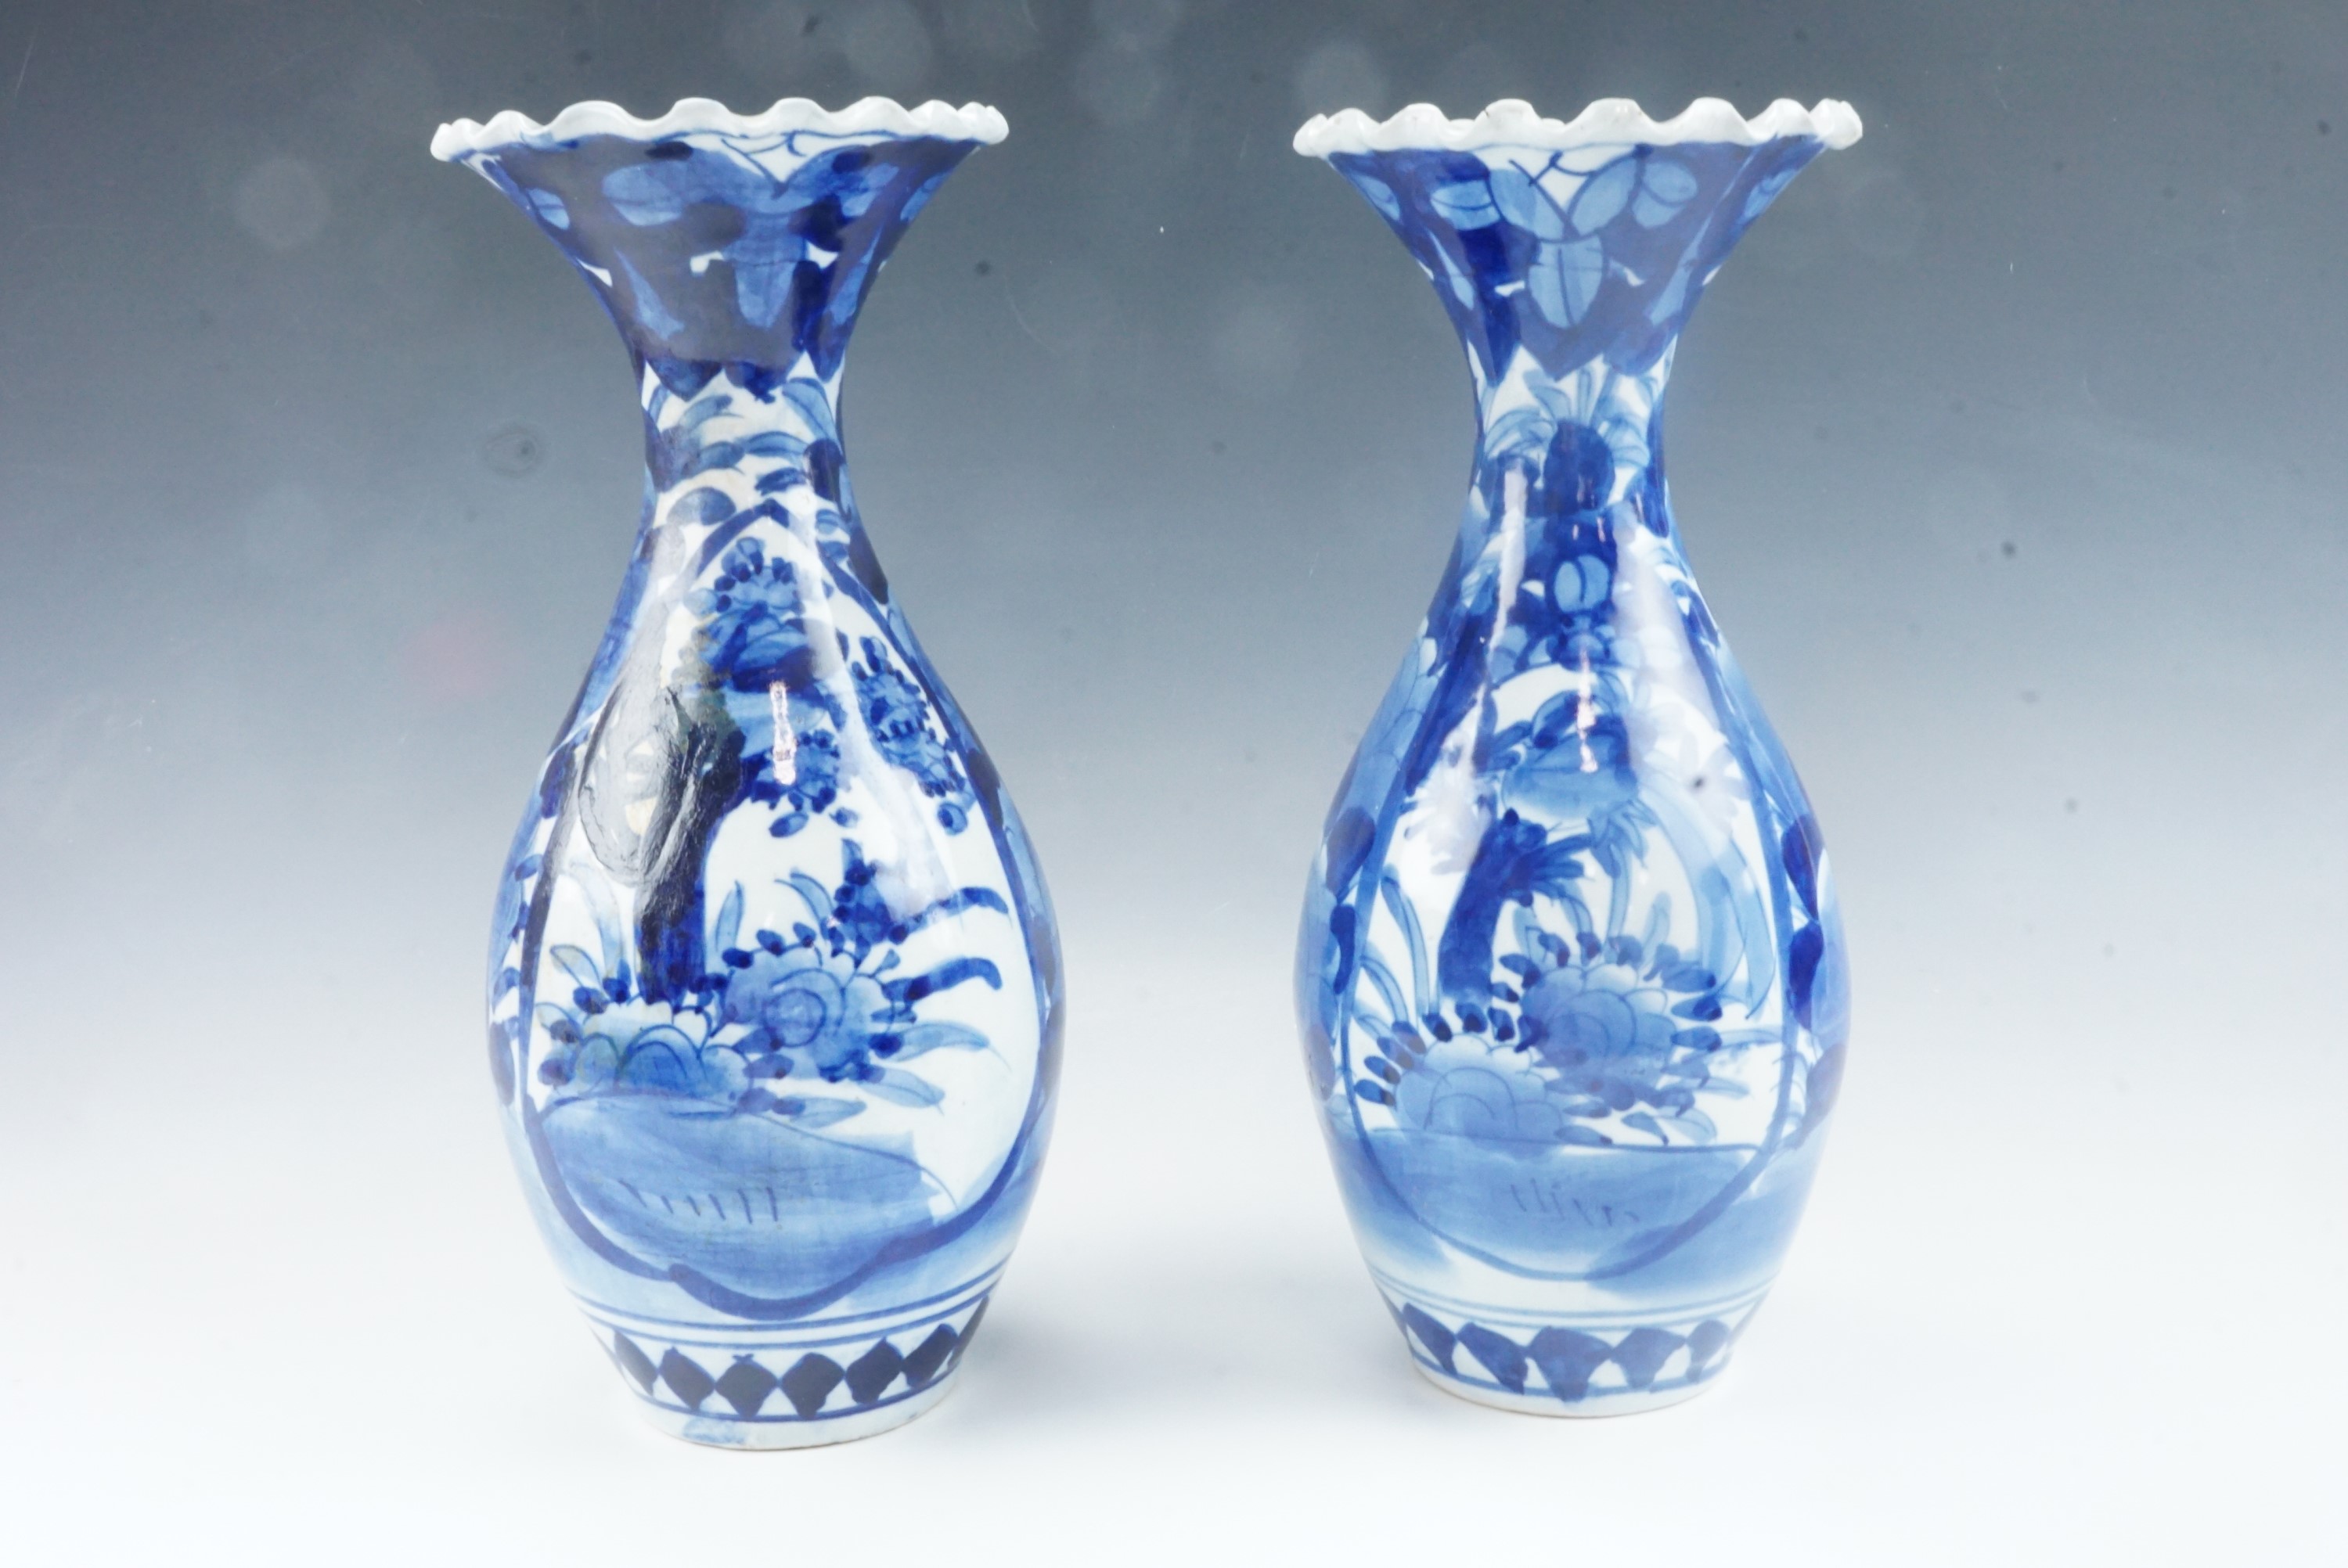 A pair of 20th Century Japanese blue and white porcelain vases, of baluster form with everted